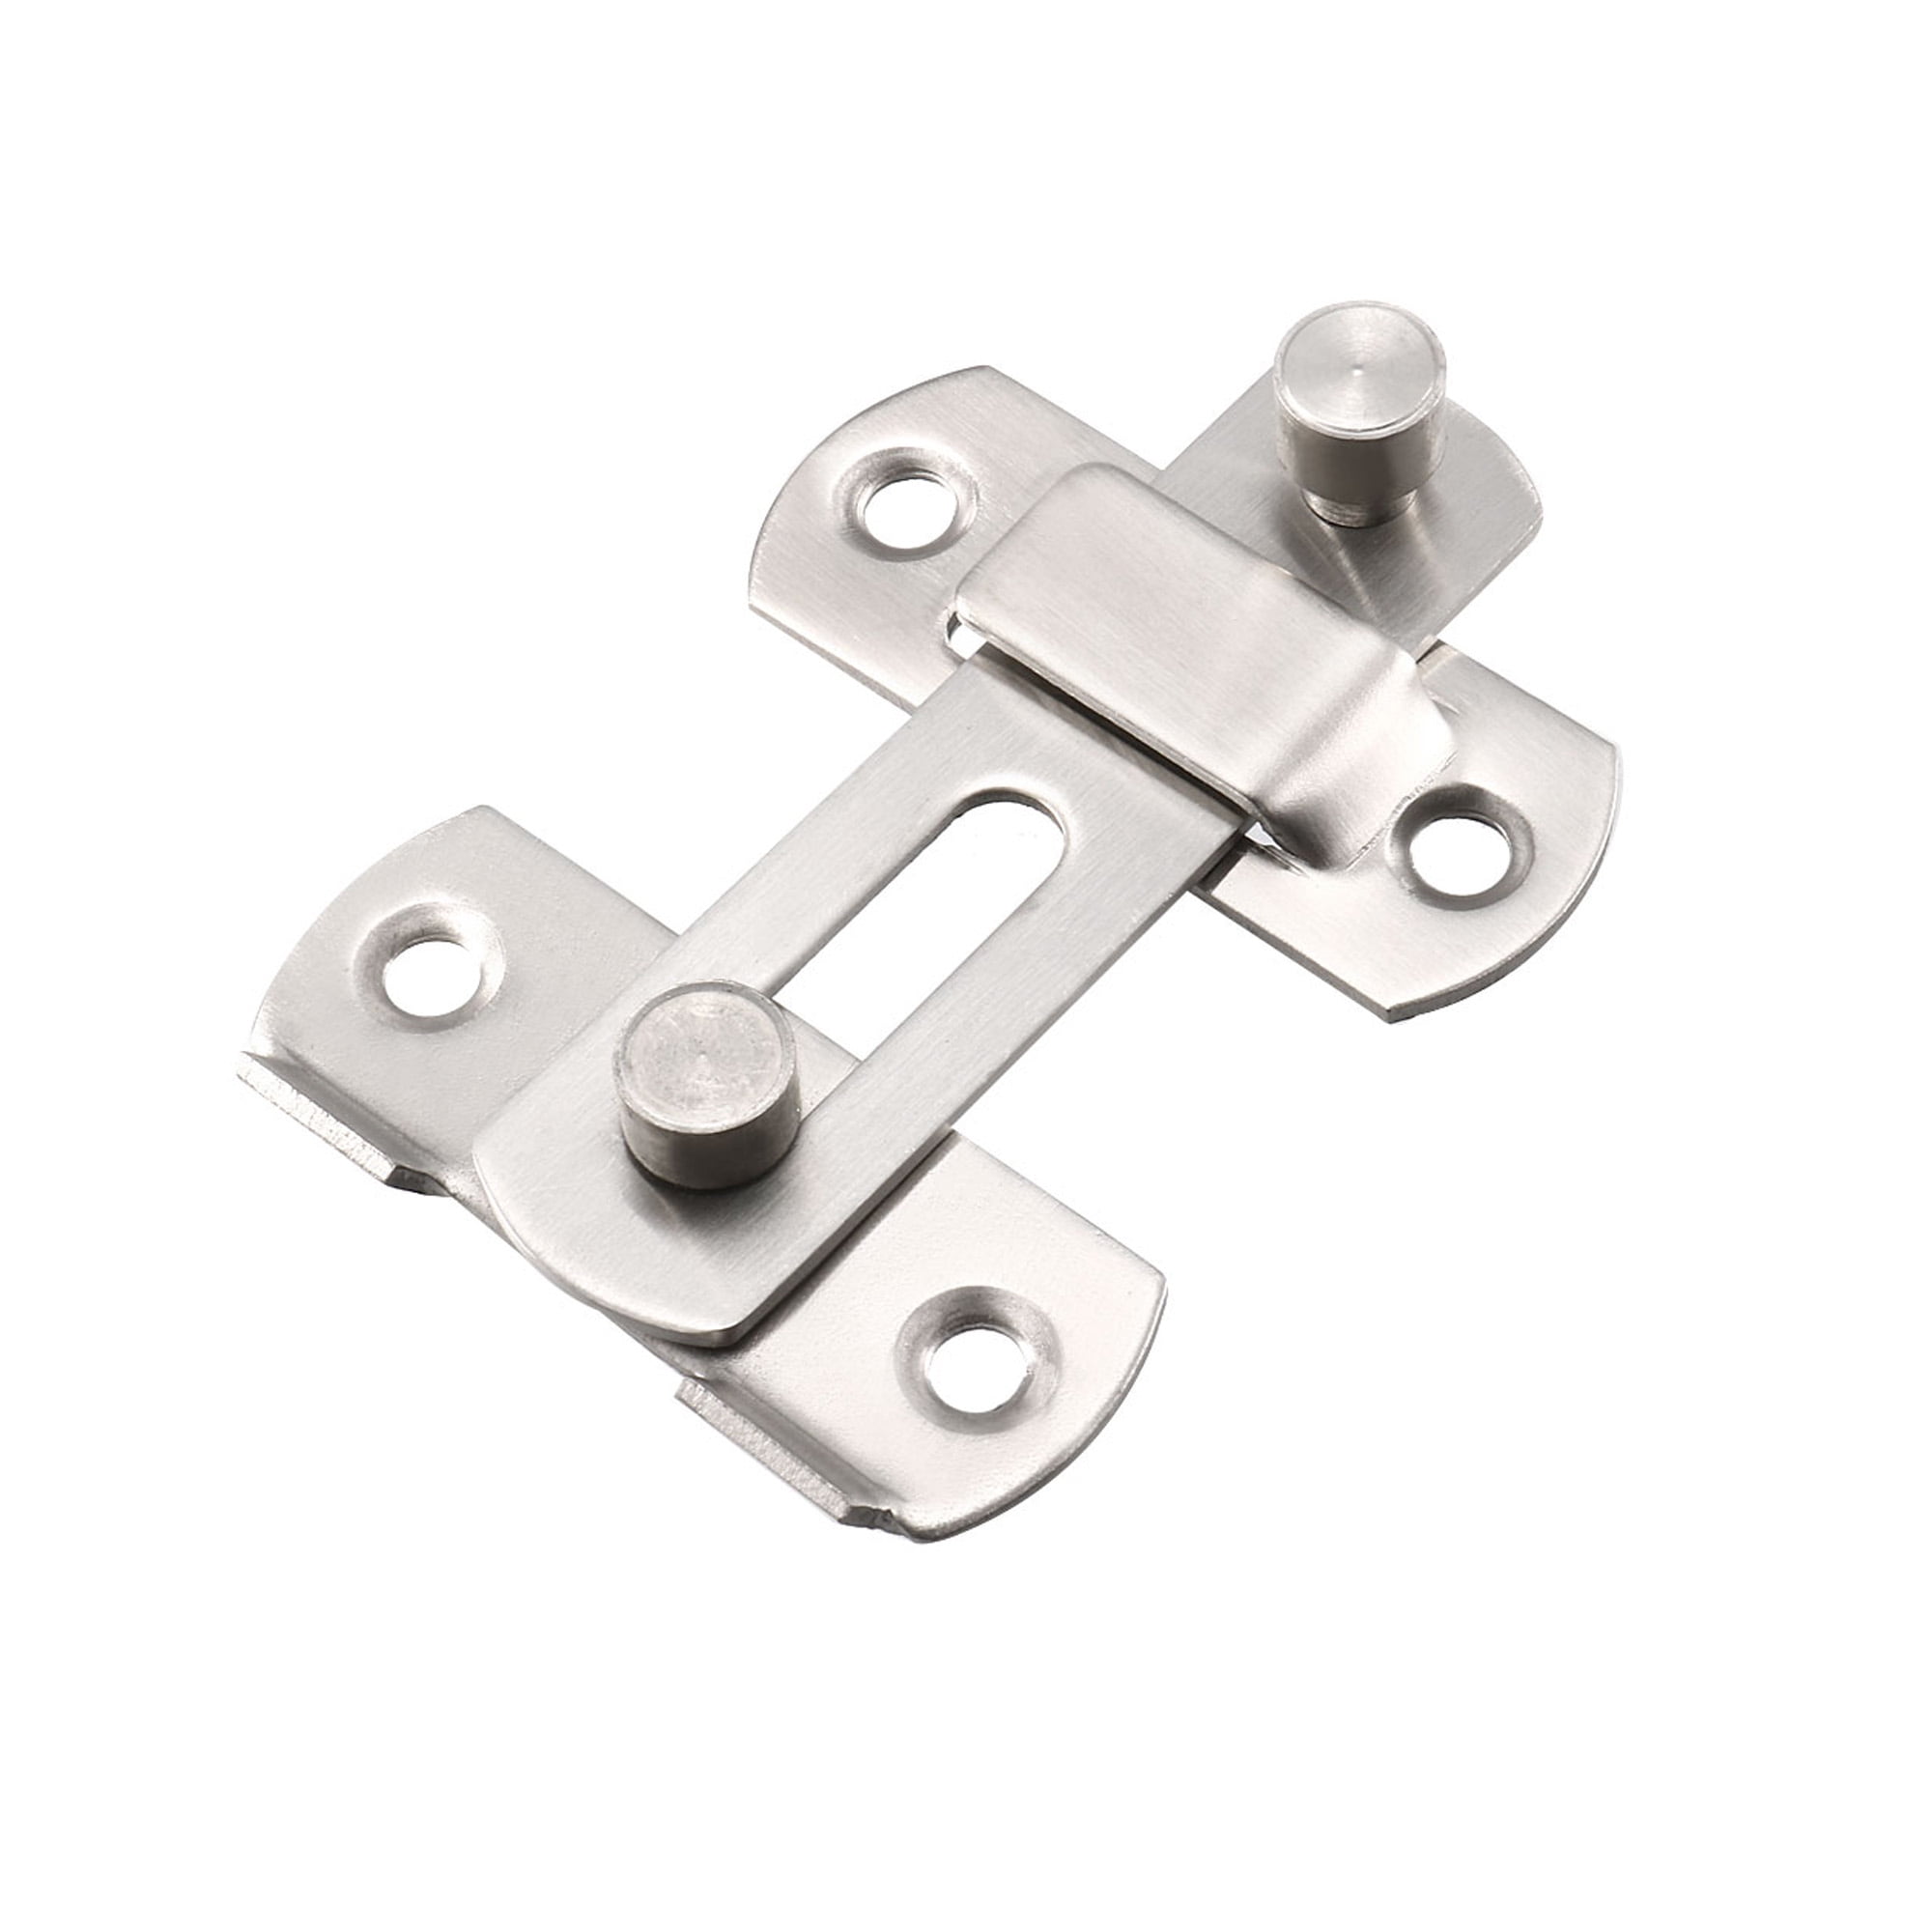 Sentry Supply 650-9252 Slide Lock Keeper Pack of 1 Satin 7/8 Inch Hole Centers Stamped Stainless Steel 